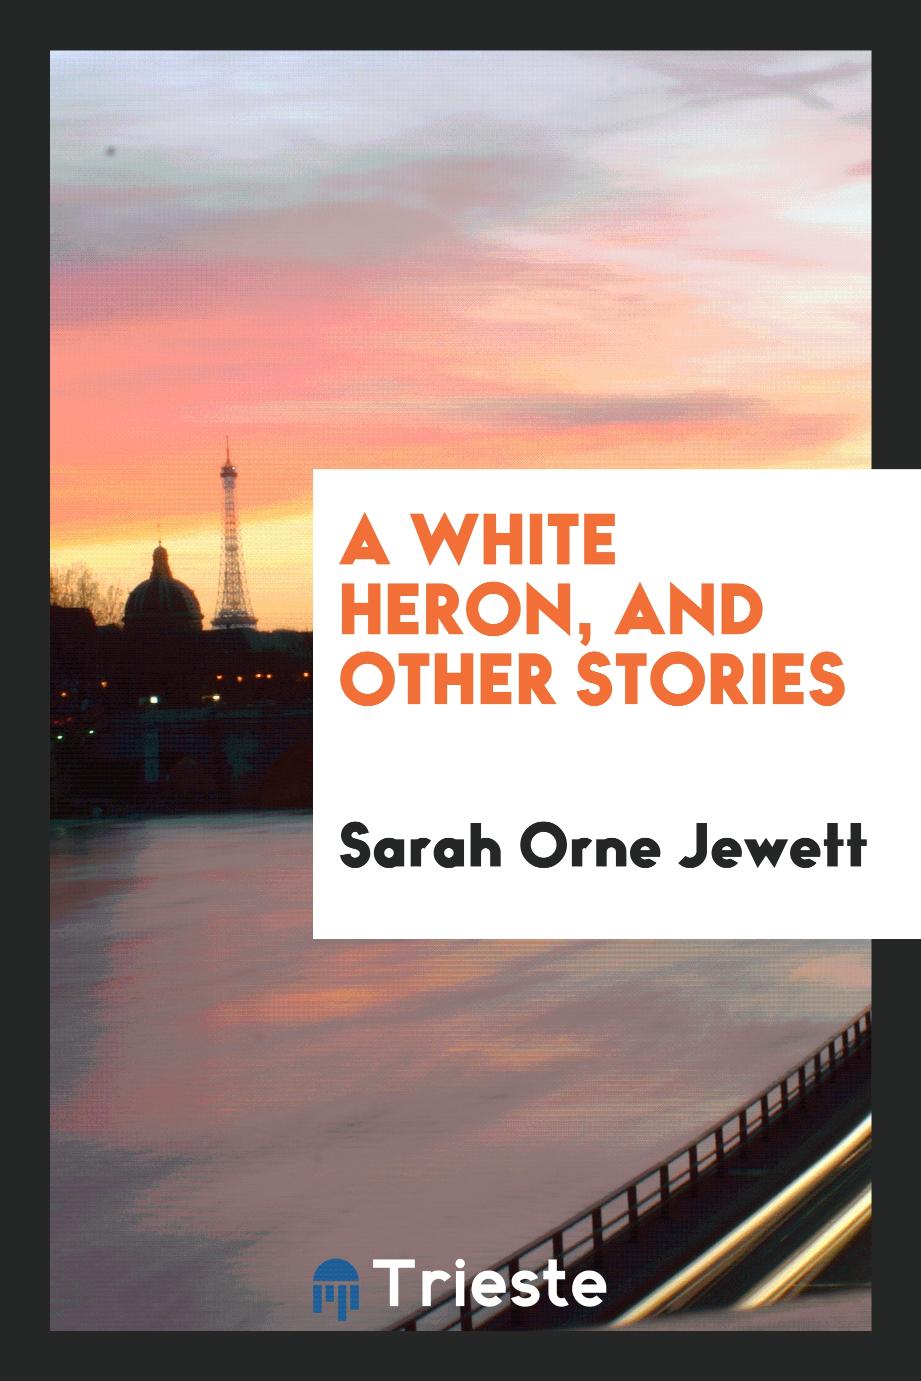 A white heron, and other stories